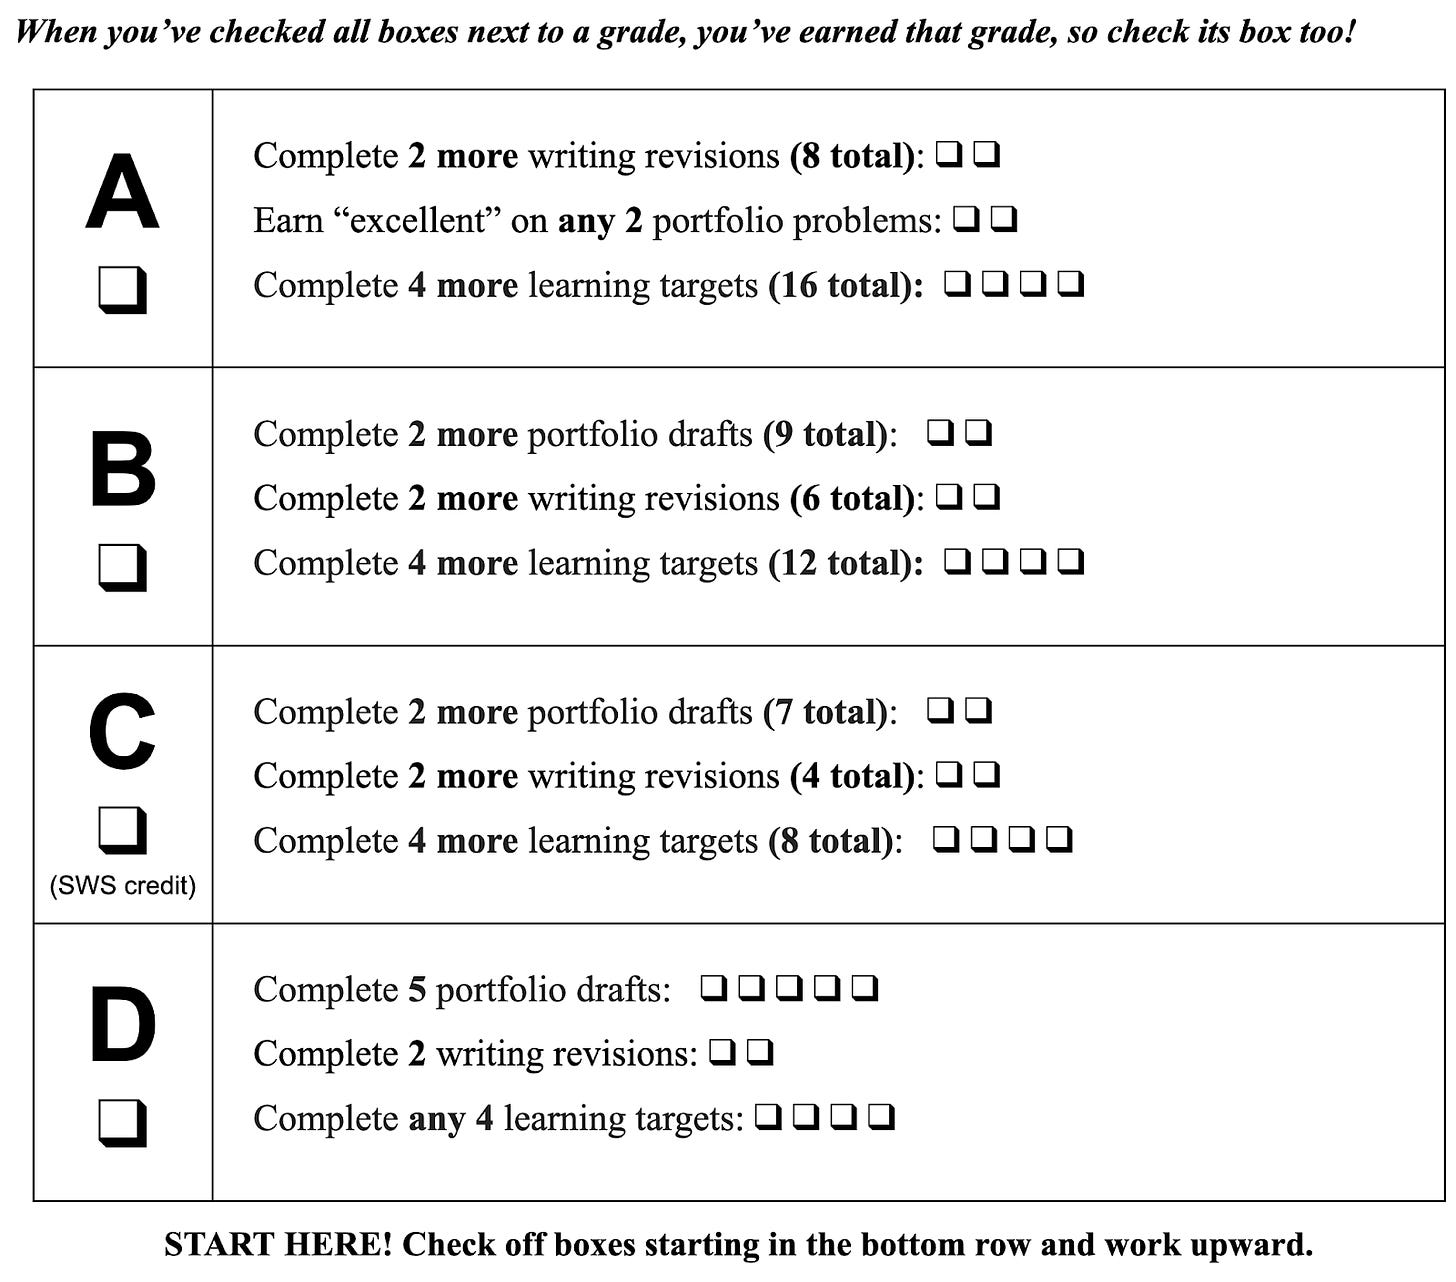 A summary of grade requirements. Each row is labeled with a letter grade, and next to it are a summary of requirements for that grade, with checkboxes for when they've been completed.